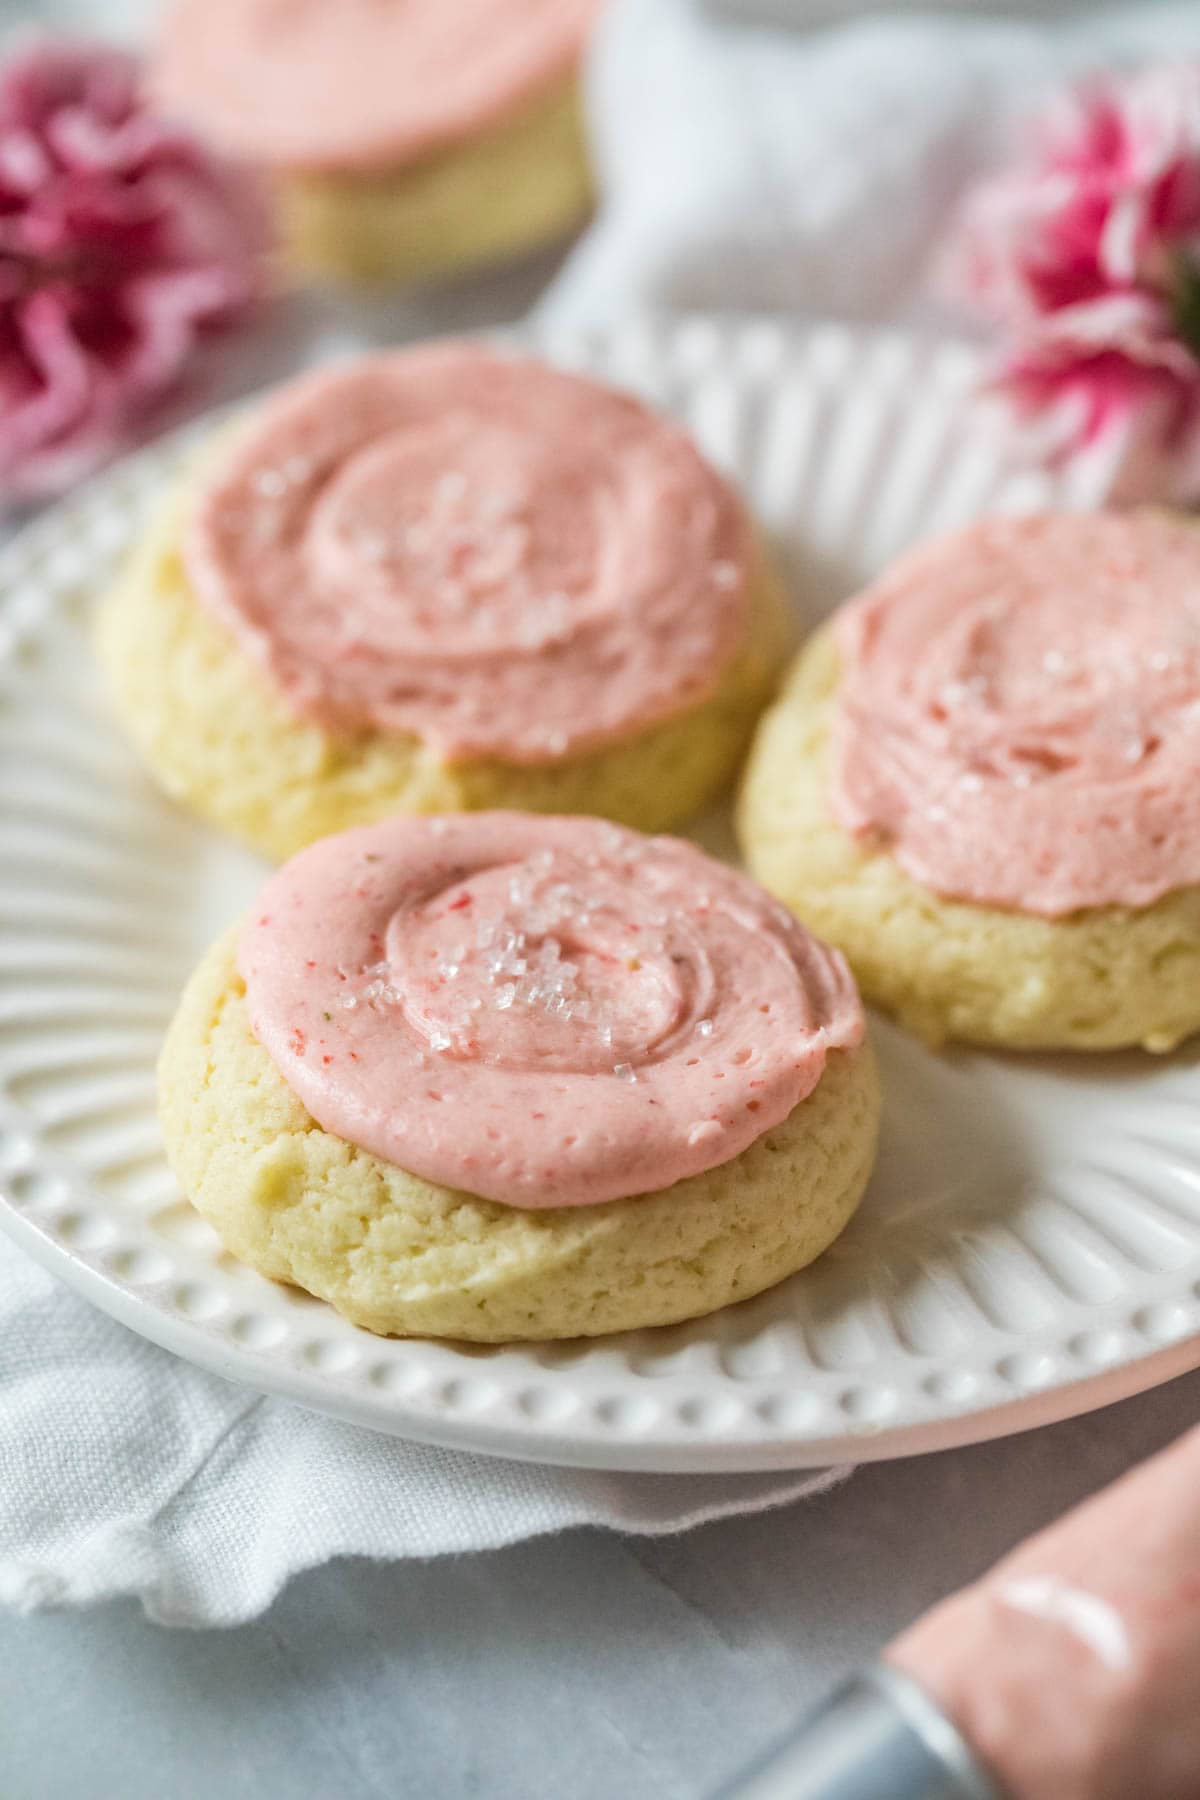 Plate of thick, cakey cookies topped with a pastel pink frosting.